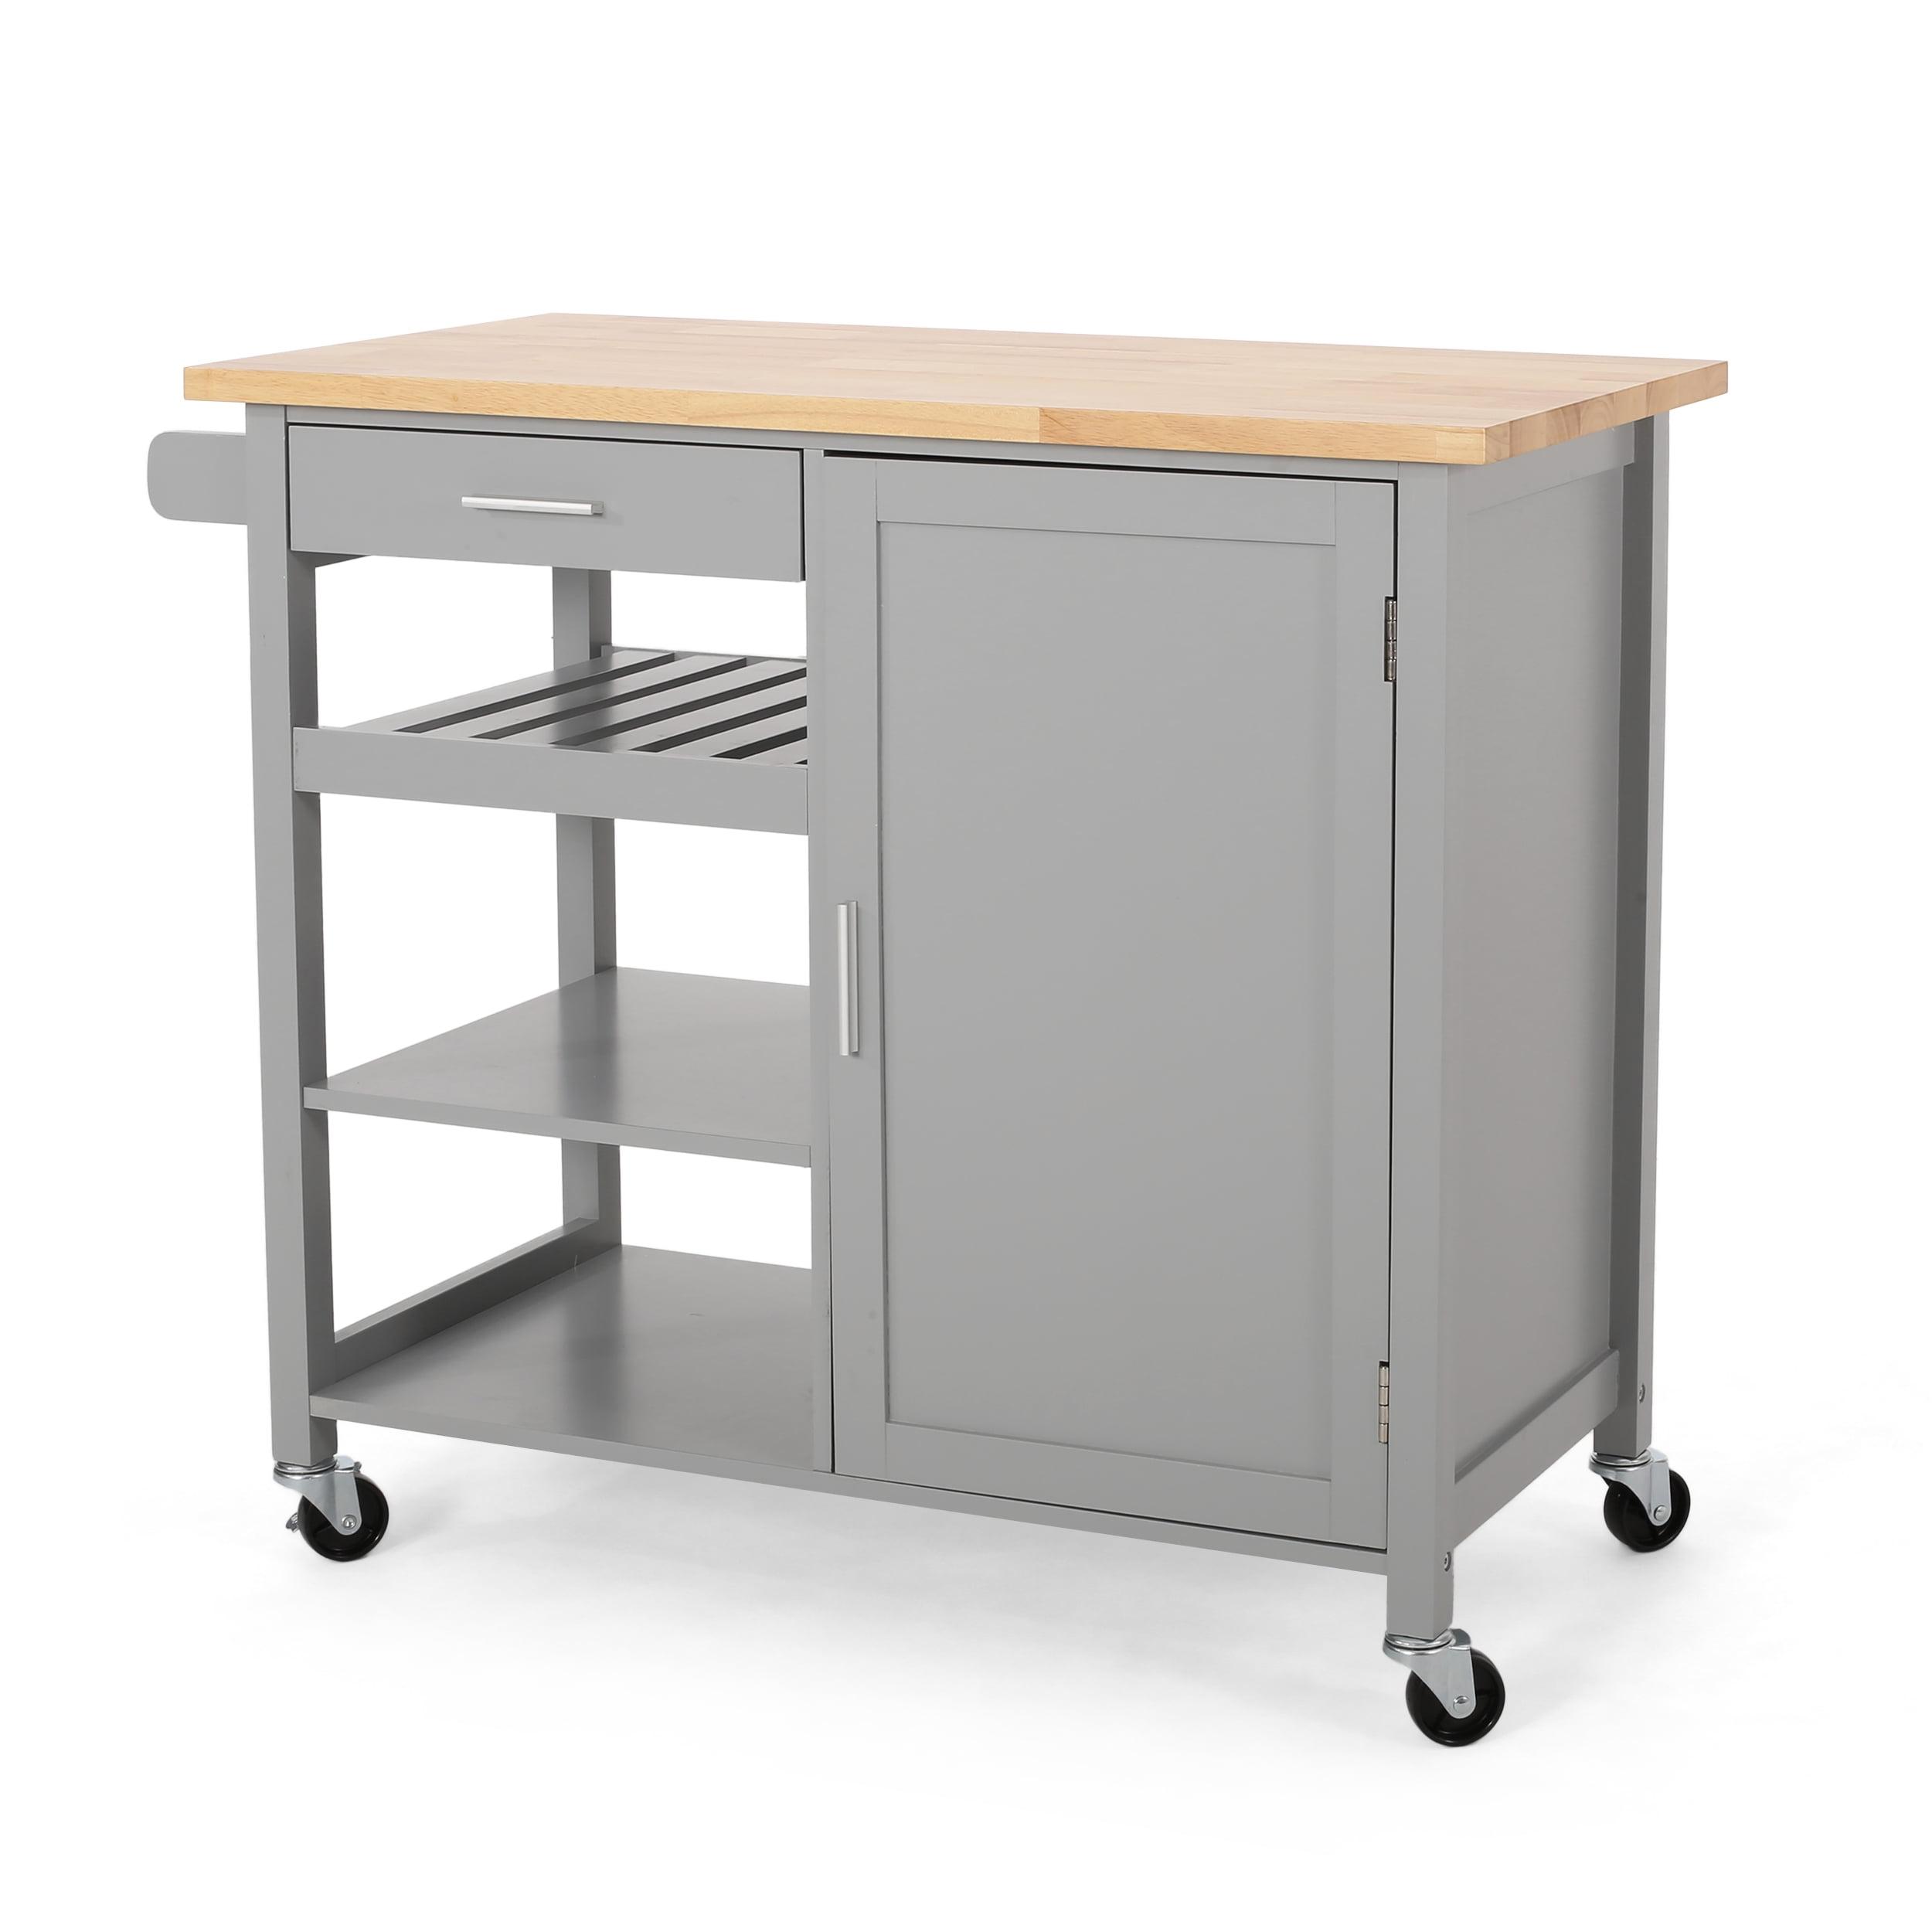 Contemporary Grey Wood Kitchen Cart with Storage and Casters